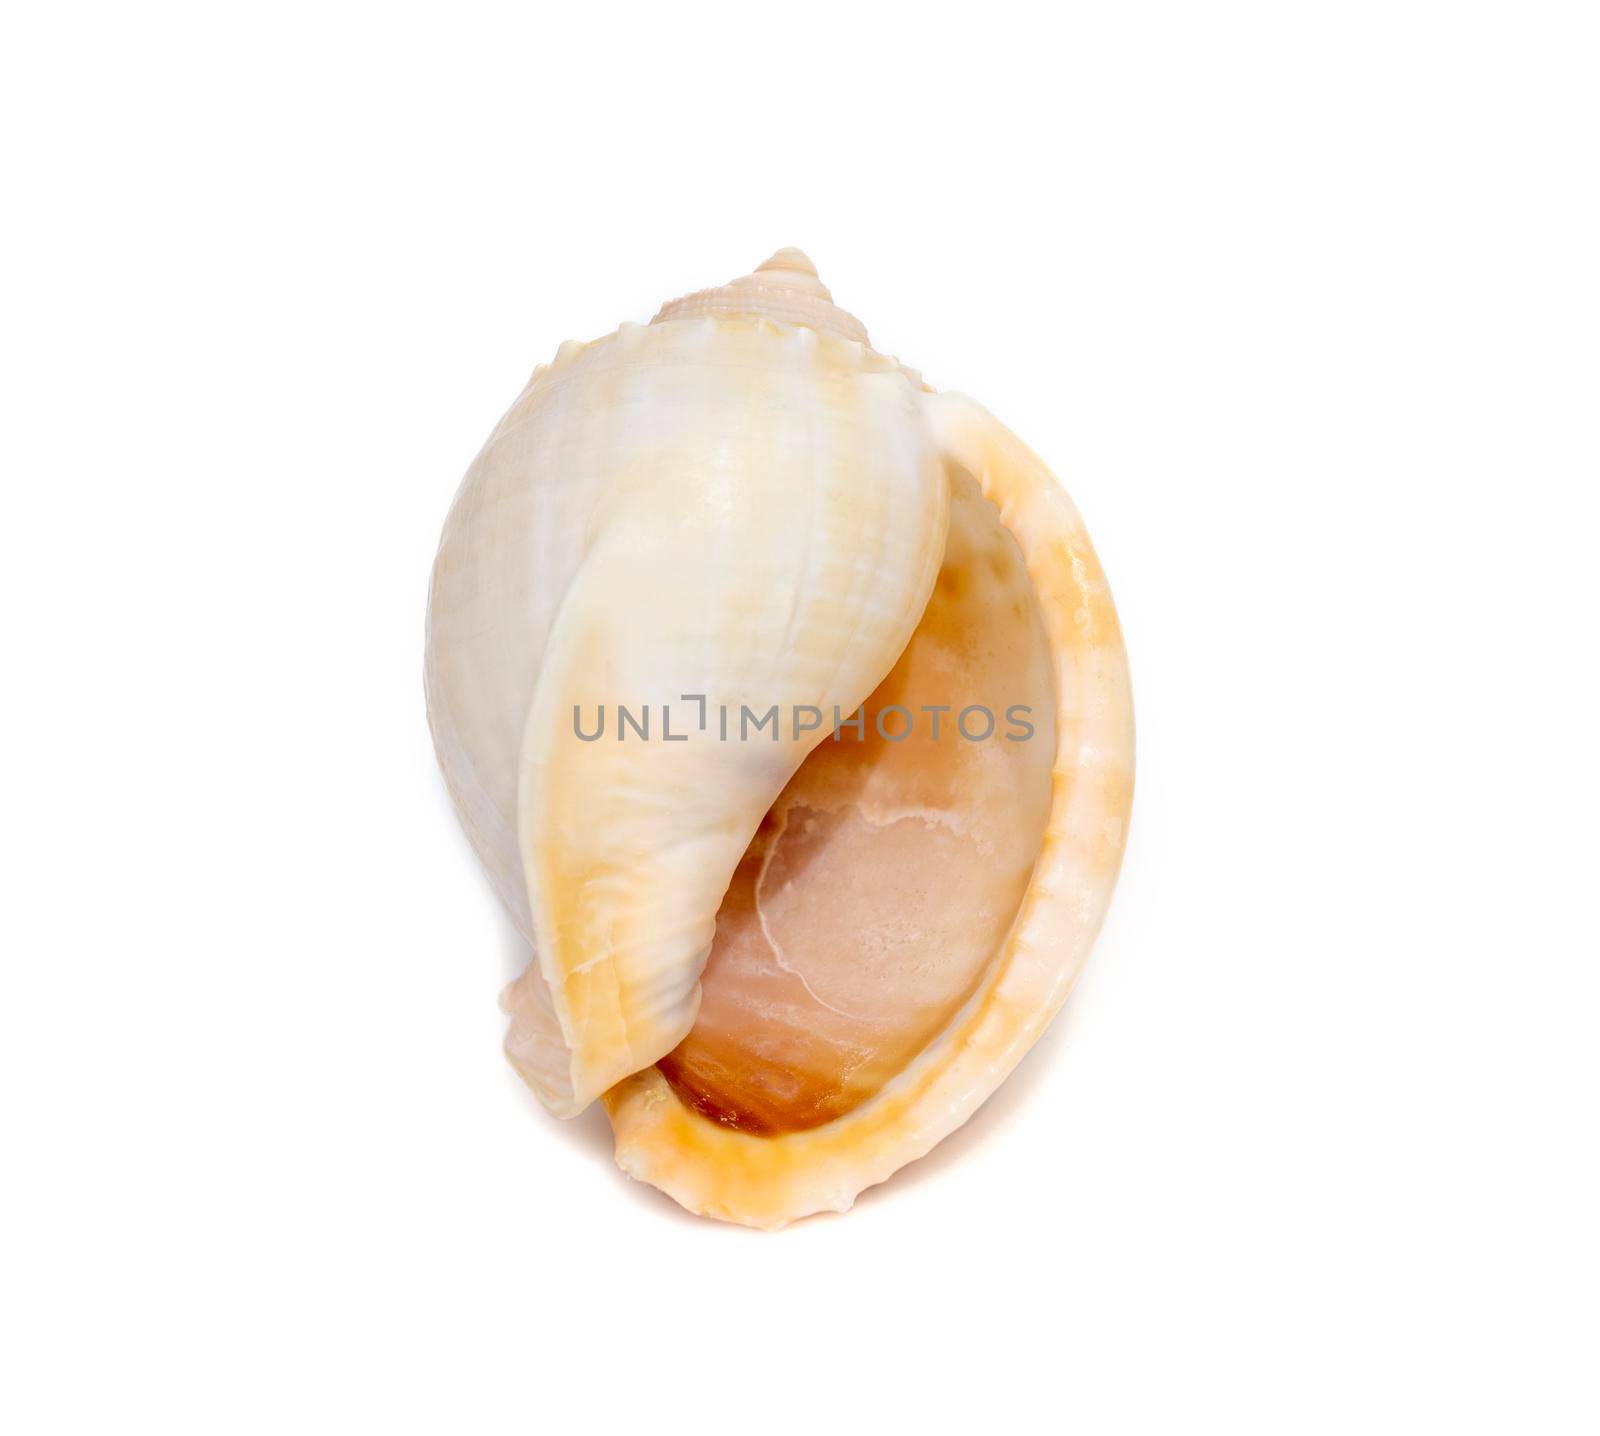 Image of phalium glaucum shell, common name the grey bonnet or glaucus bonnet, is a species of large sea snail, a marine gastropod mollusk in the family Cassidae, the helmet snails and bonnet snails isolated on white background. Undersea Animals. Sea Shells. by yod67